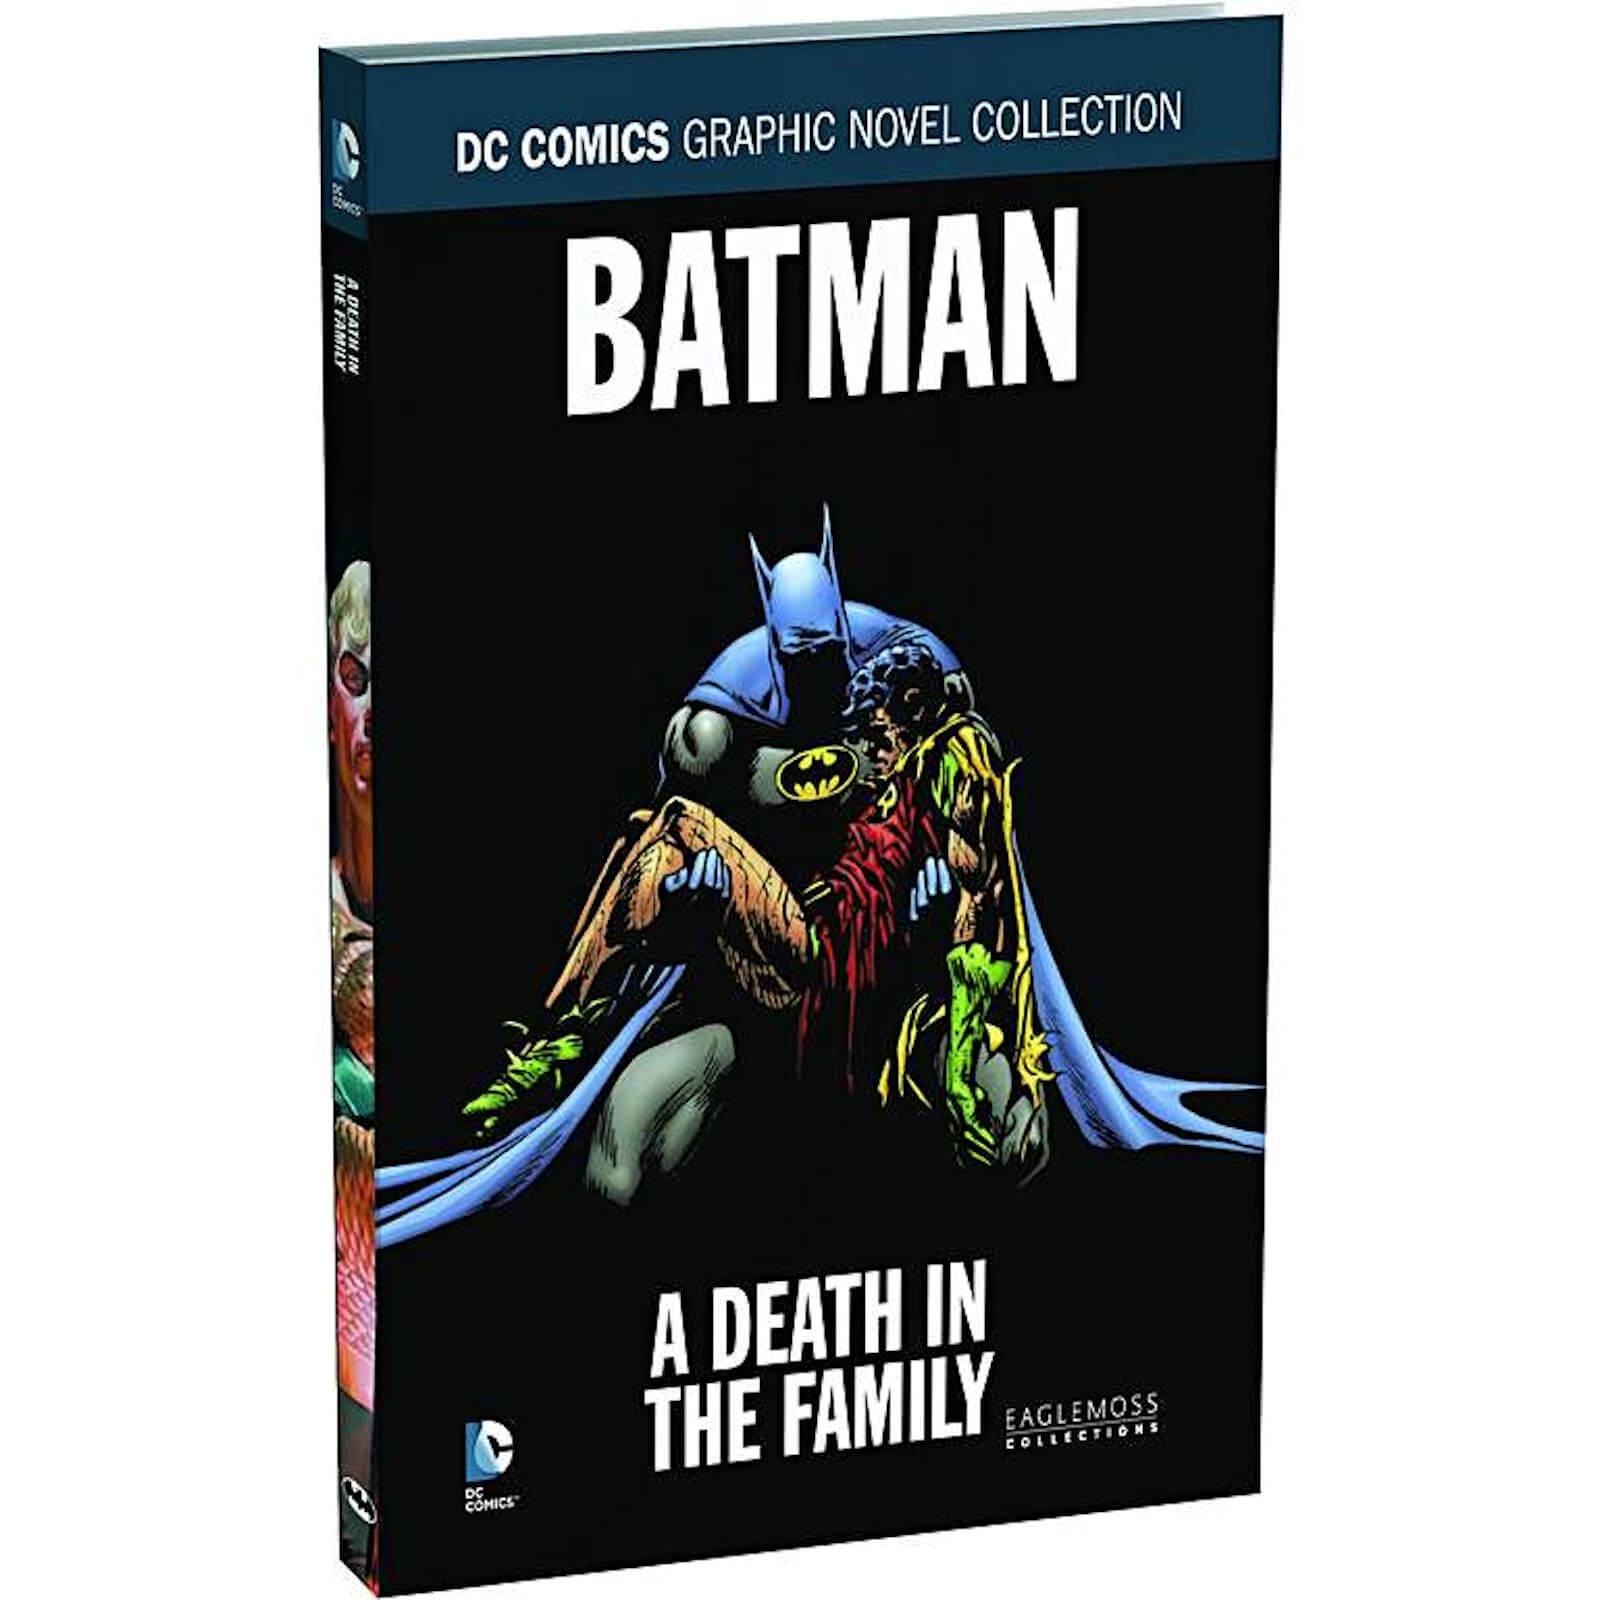 DC Comics Graphic Novel Collection - A Death in the Family - Volume 11